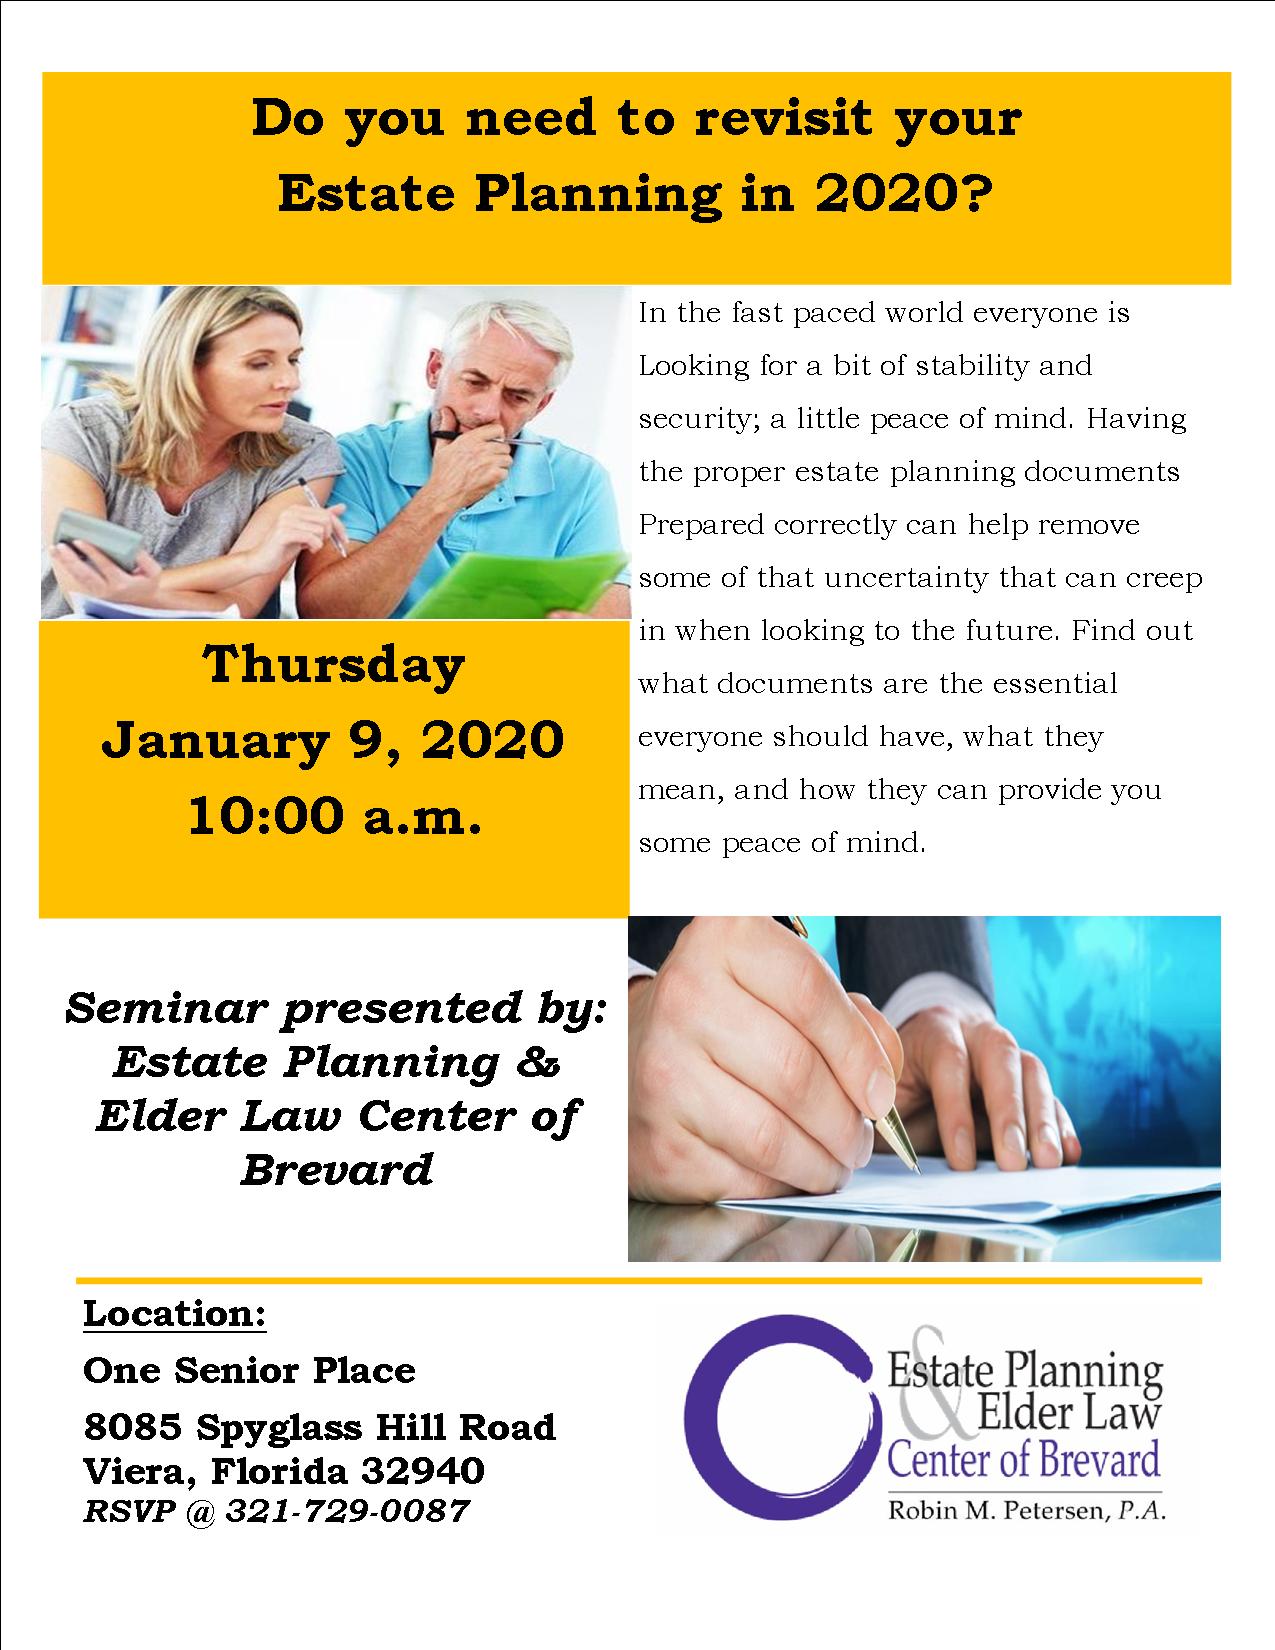 Do you need to revisit your Estate Planning in 2020? presented by Estate Planning and Elder Law Center of Brevard